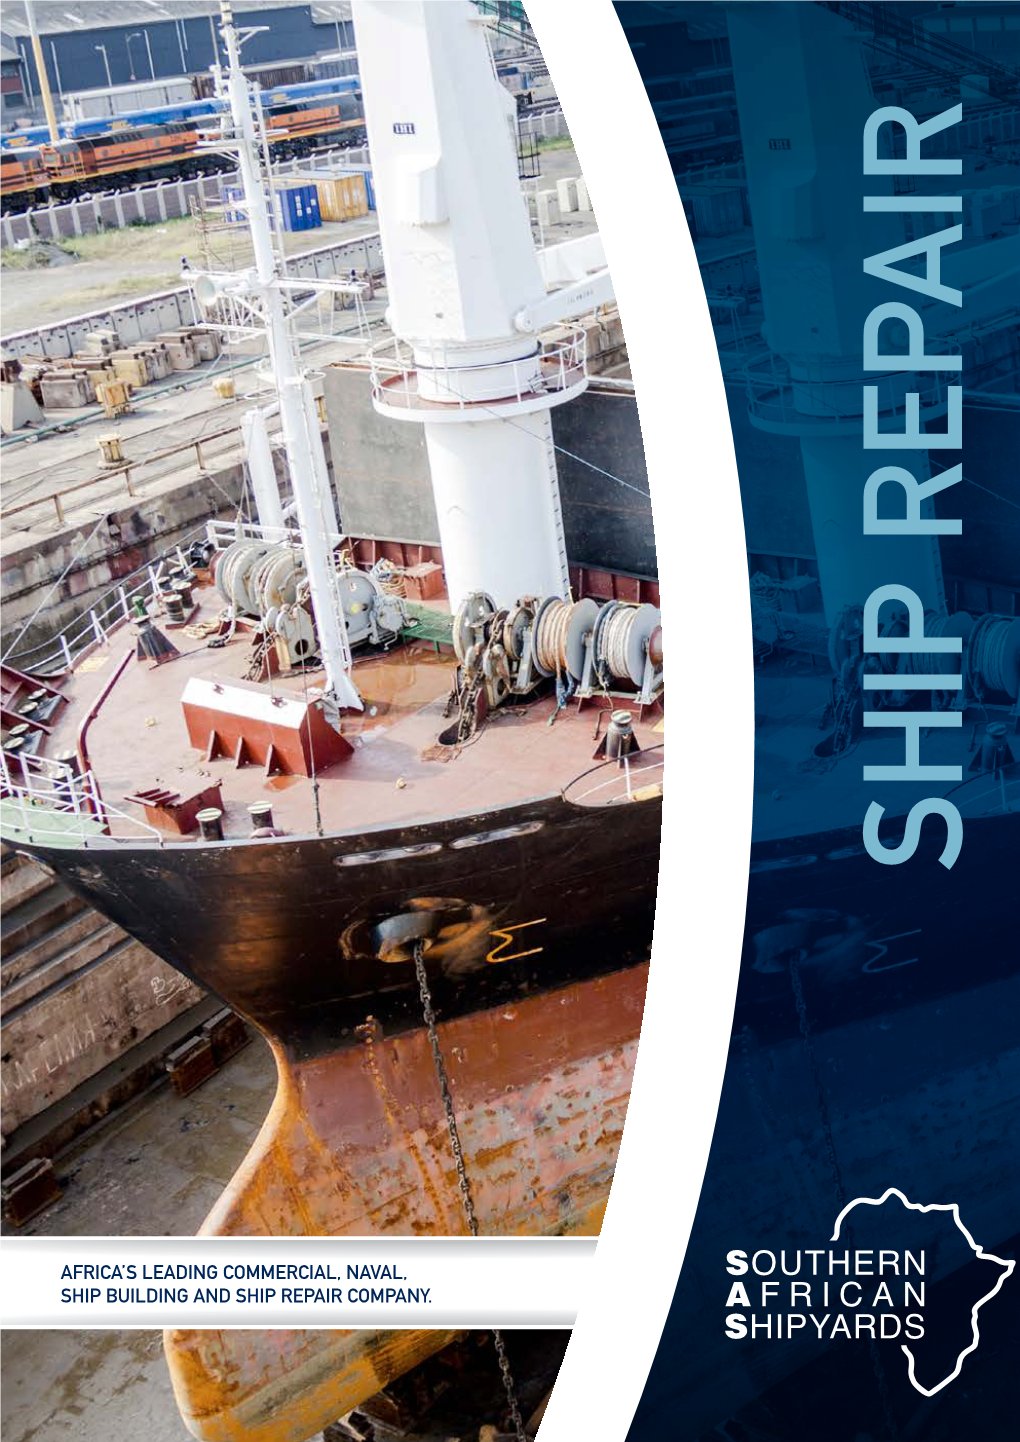 Africa's Leading Commercial, Naval, Ship Building and Ship Repair Company